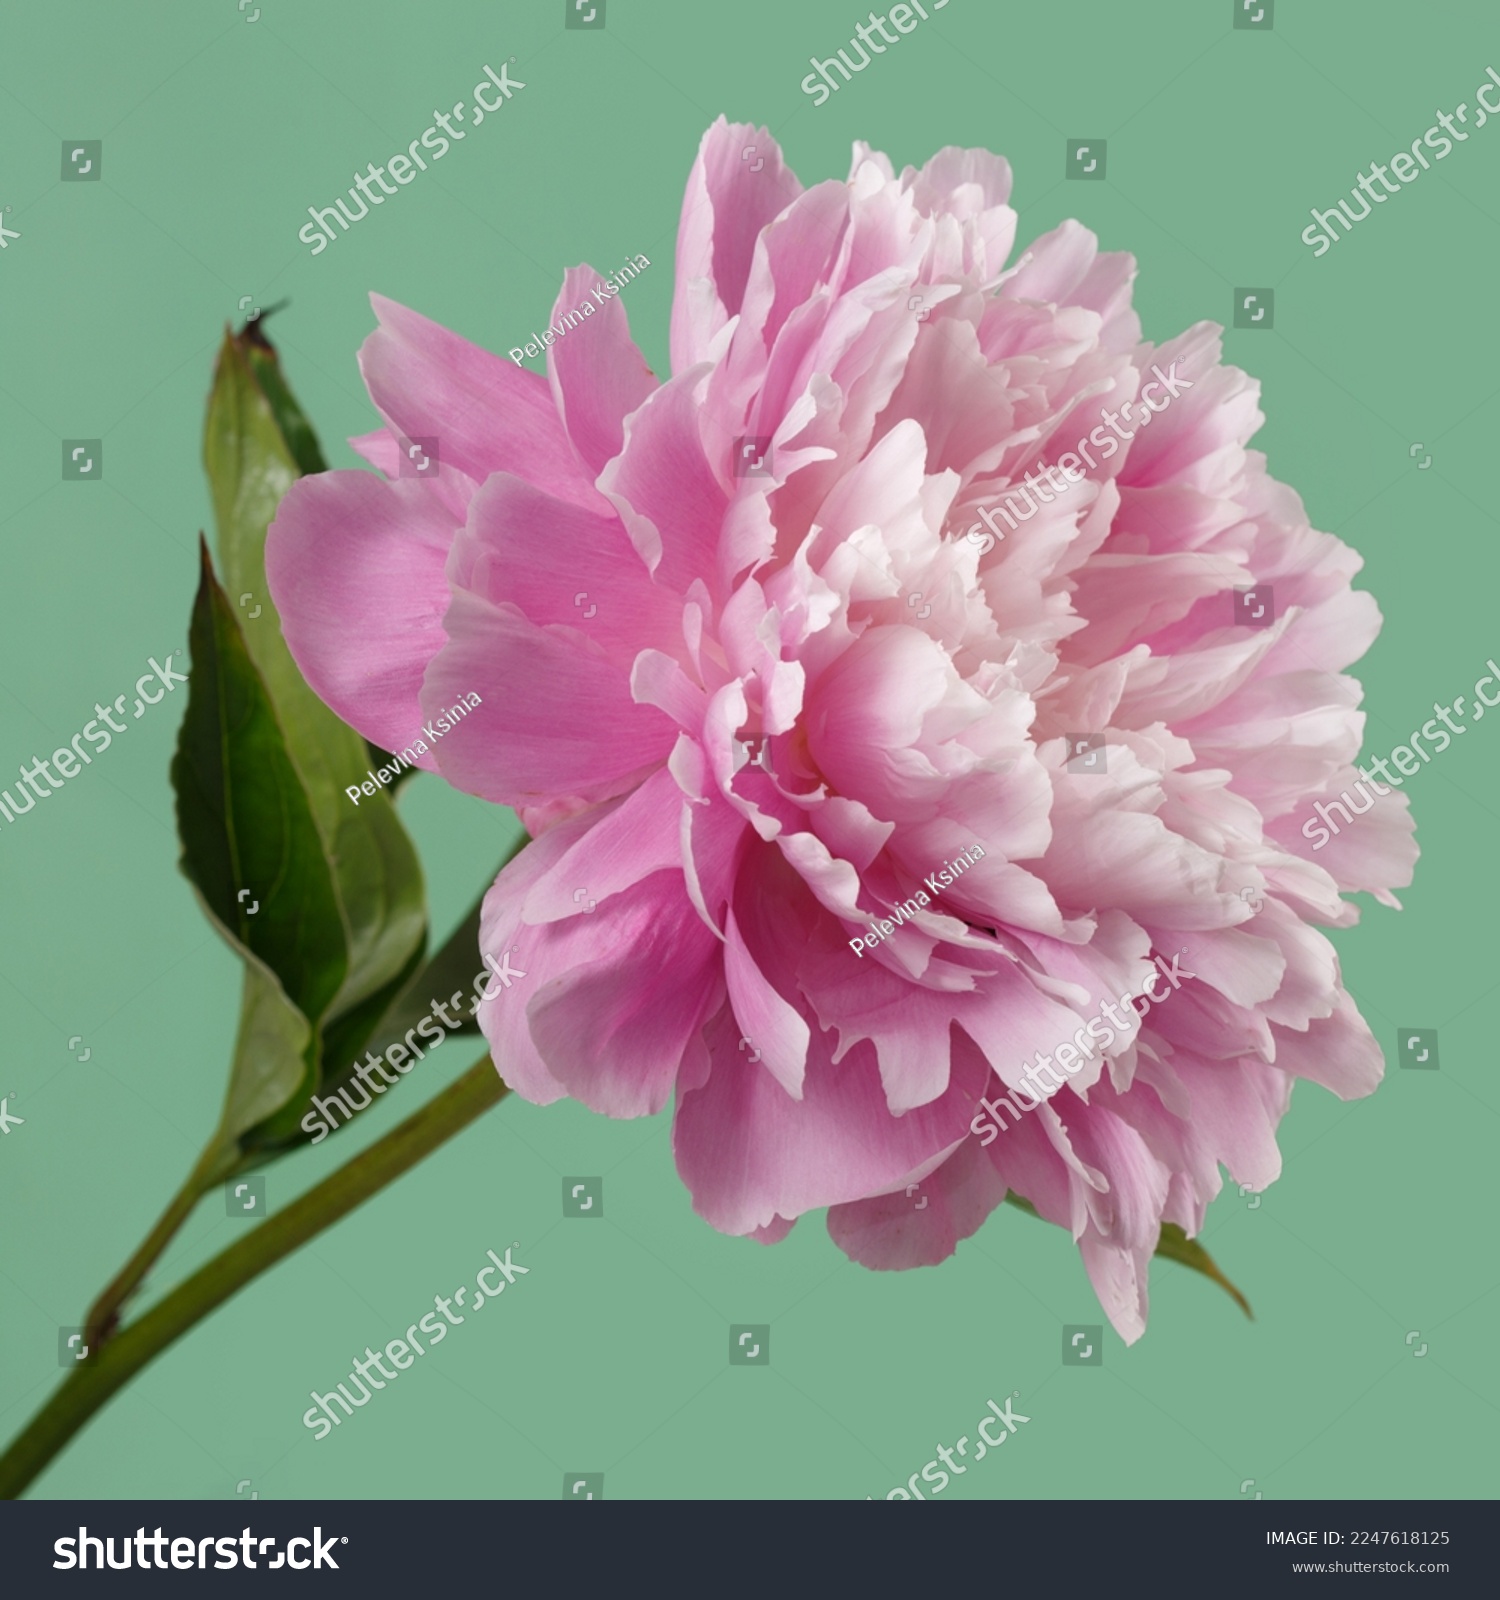 Soft pink peony flower isolated on light green background. #2247618125